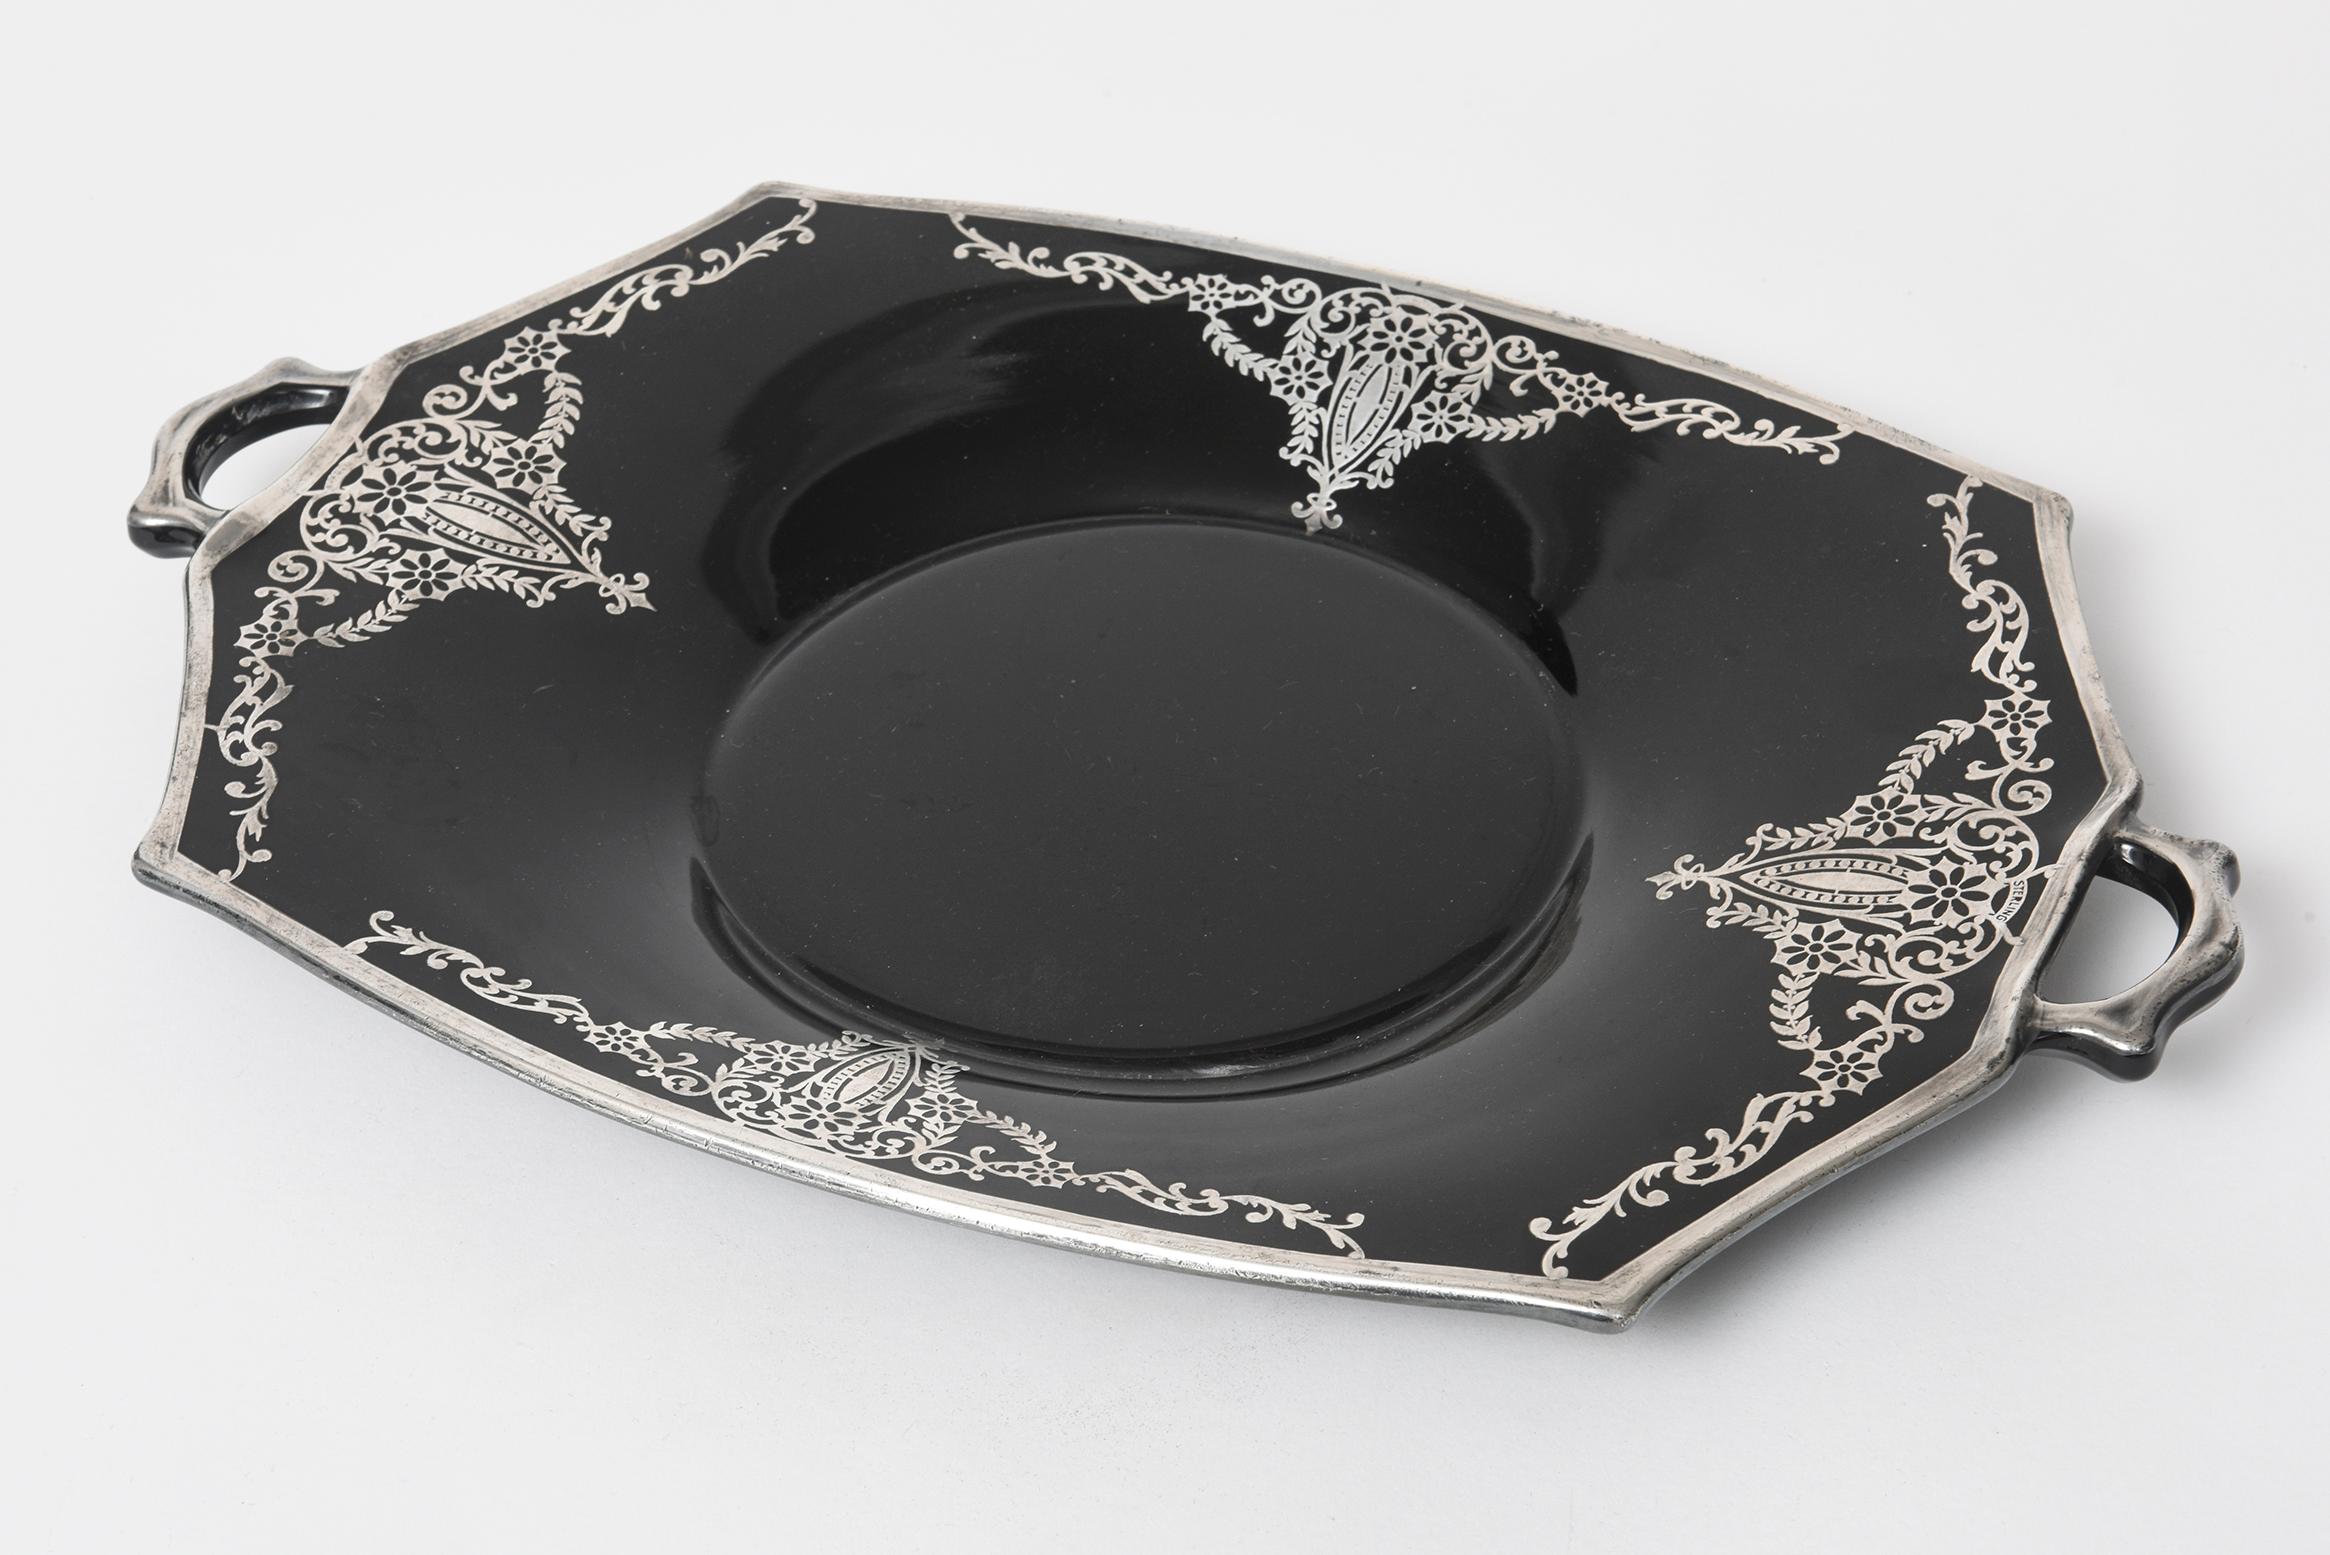 This shiny ebony black glass elongated octagonal serving tray features 4 sections with flowers, leaves and scrolls. The outer rim and the handles have a sterling silver line. Marked sterling in one of the designs by the handle. The tray levels down